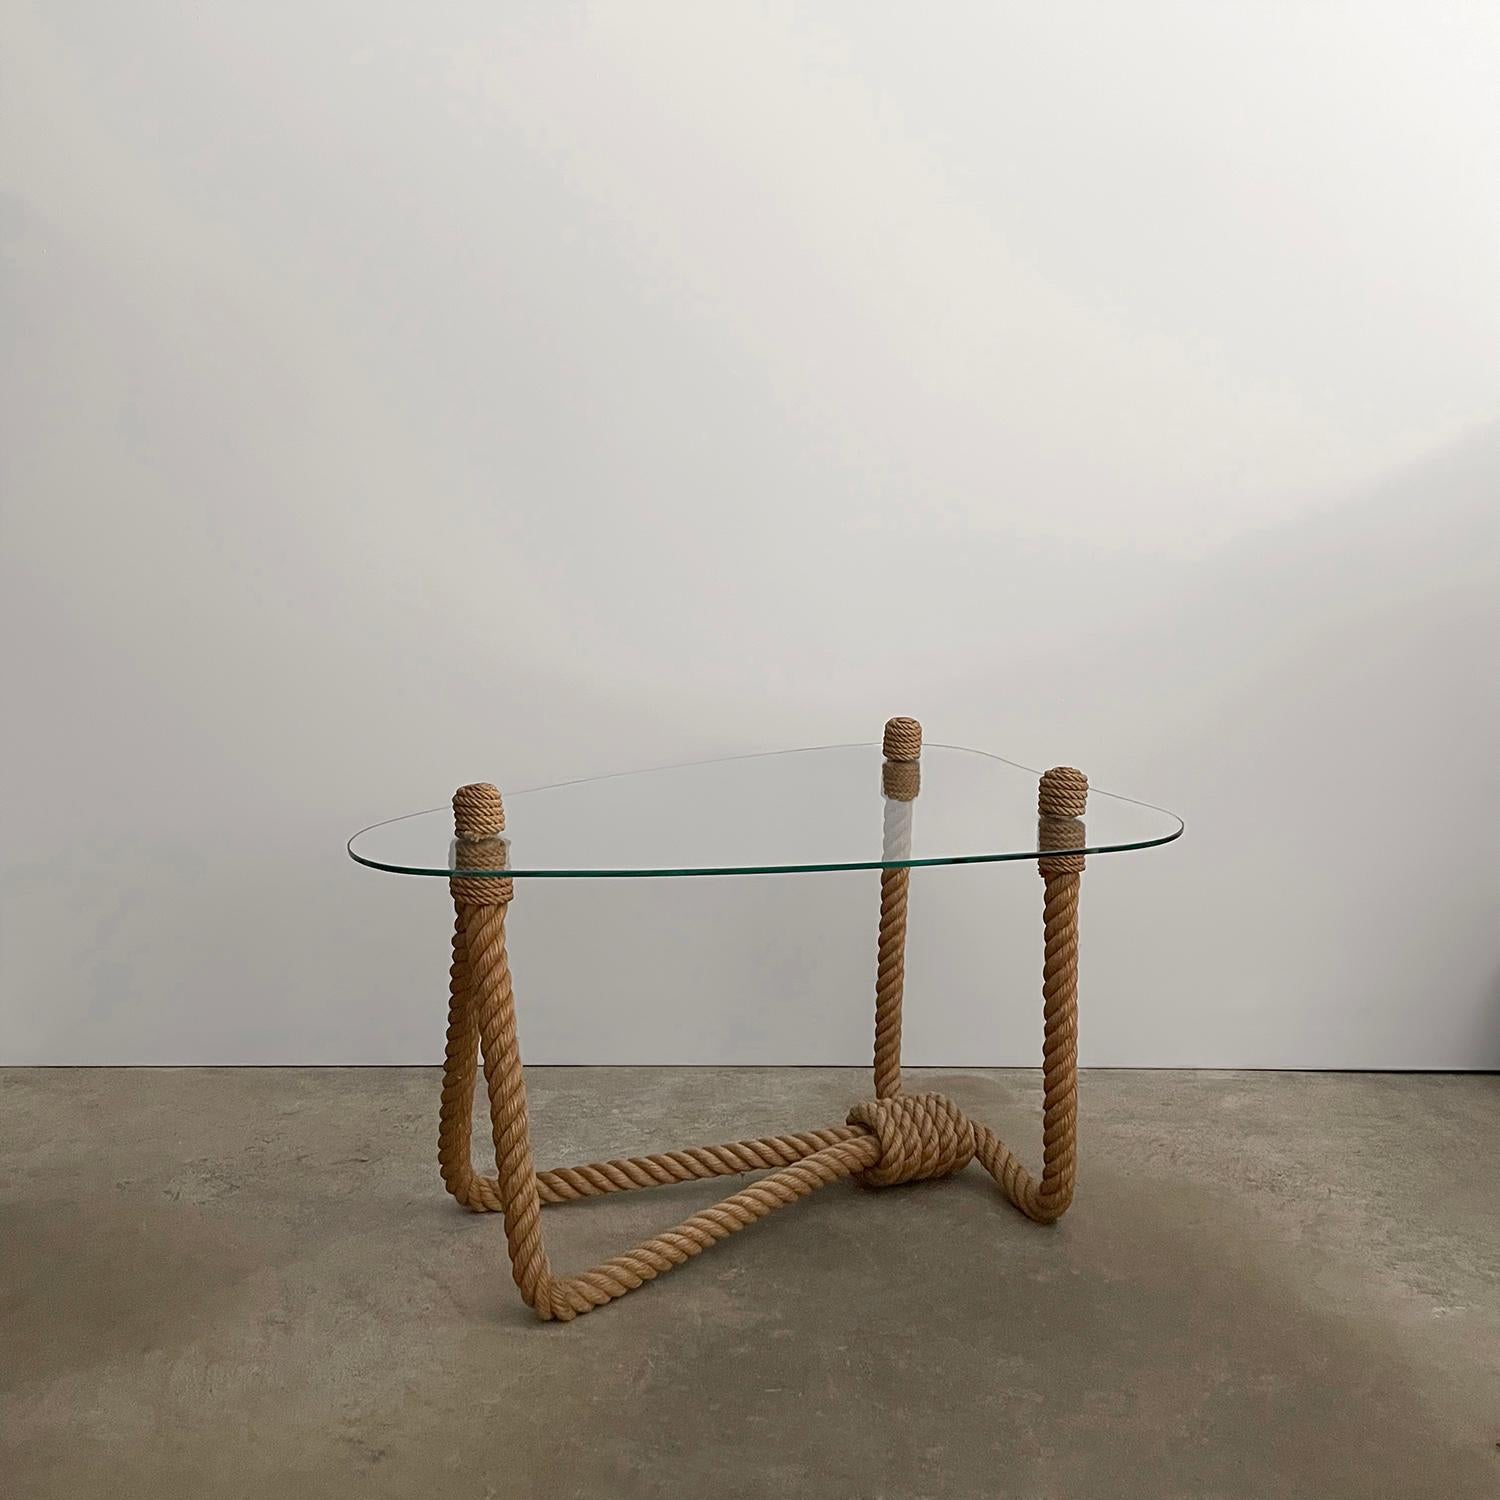 Adrien Audoux and Frida Minet rope & glass coffee table
France, circa 1950’s
Beautifully sculpted rope frame base 
Shield-shaped floating glass delicately rests upon rope posts finished with coiled rope caps
Original glass has light surface